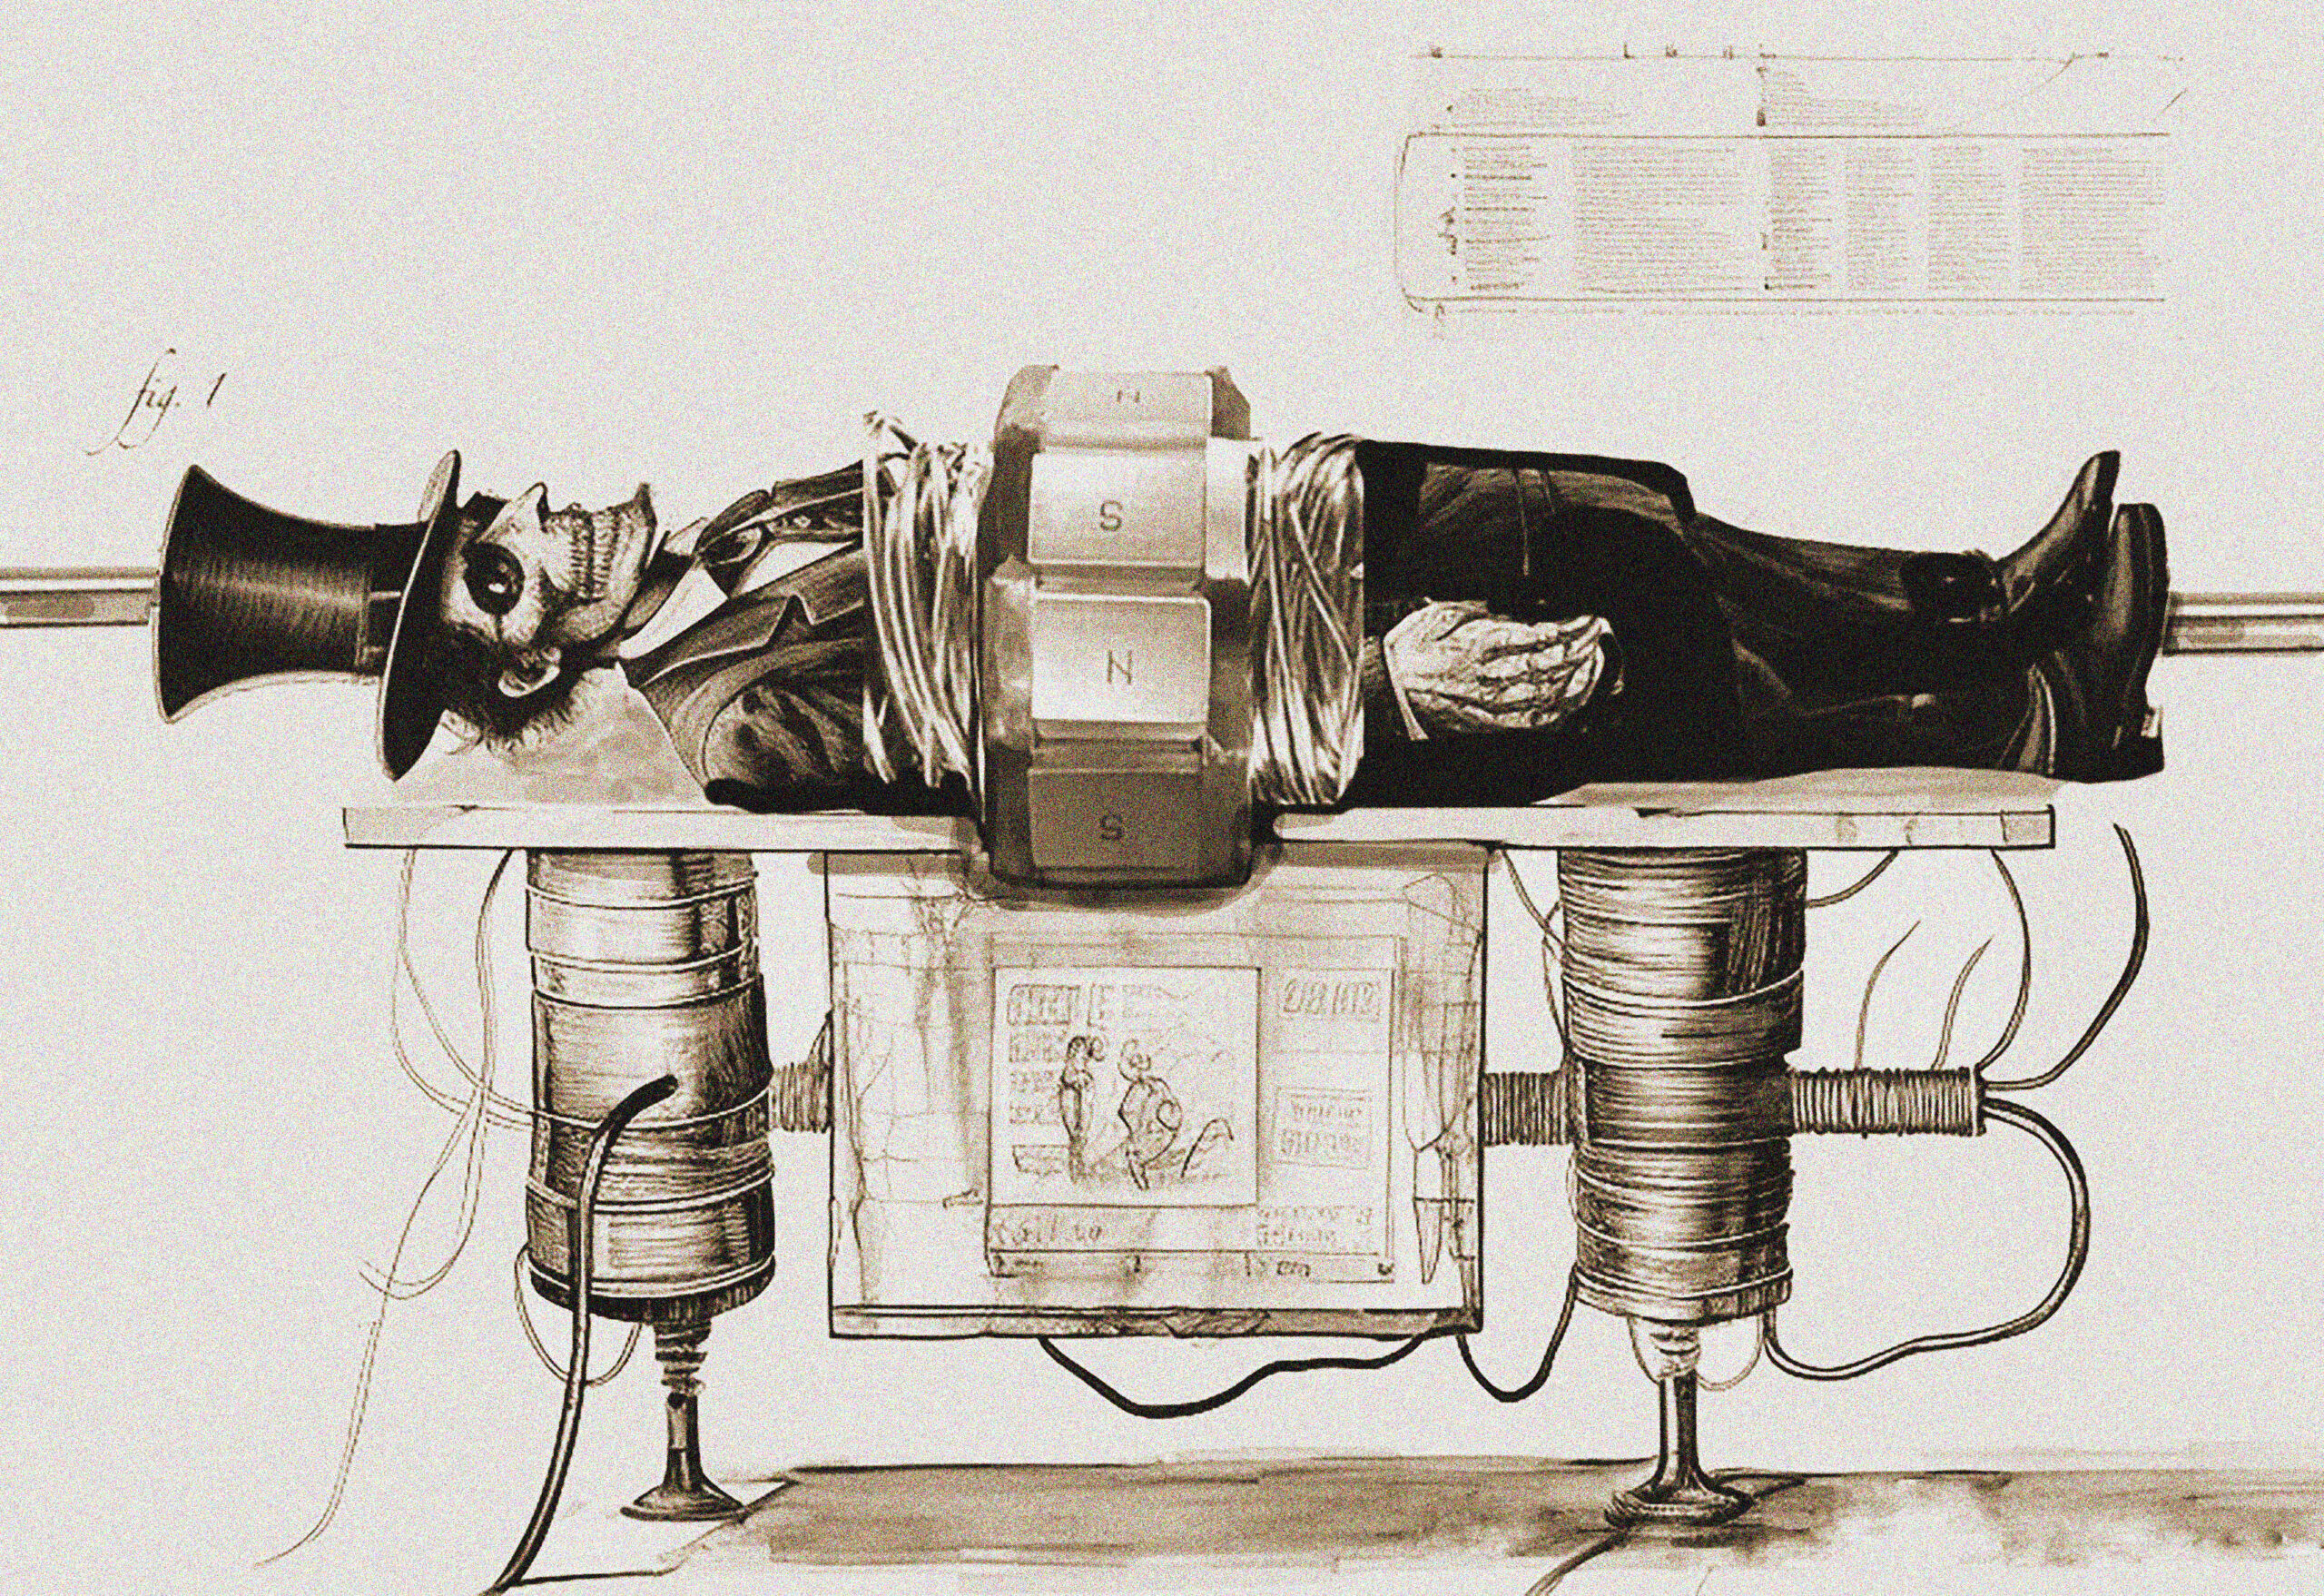 An illustration depicting an energy generation concept, where Abraham Lincoln's resting place is transformed into a power station. The setup includes Lincoln's figure wrapped in copper wire, with neodymium magnets positioned around him. The design suggests that the spinning motion of his figure, driven by the political state of his party, could be used to produce electricity.